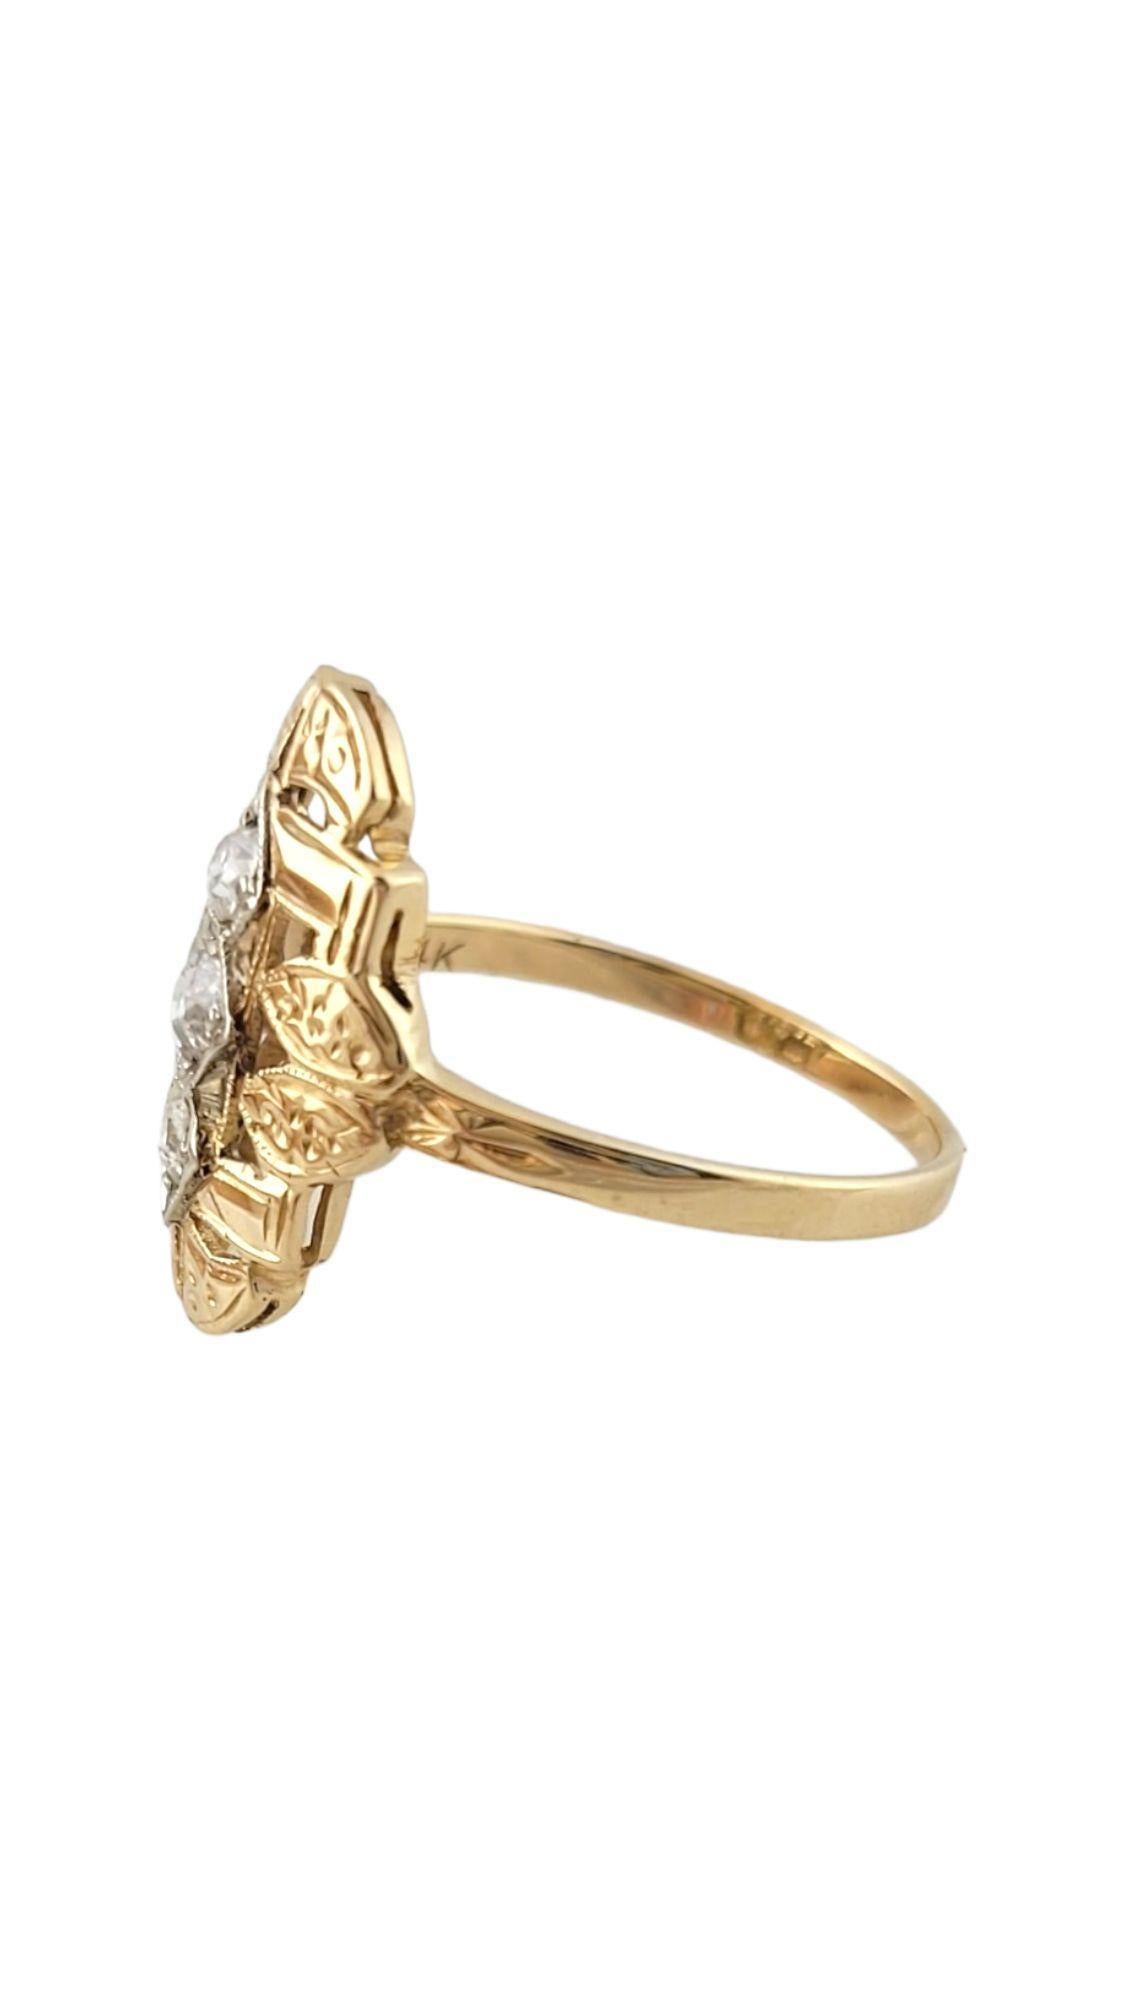 14K Yellow Gold Antique Diamond Ring Size 6.75

This gorgeous 14K yellow gold antique ring features 3 sparkling, old mine cut diamonds!

Approximate total diamond weight: 0.30 cts

Diamond clarity: I1

Diamond color: I-K

Ring size: 6.75
Shank: